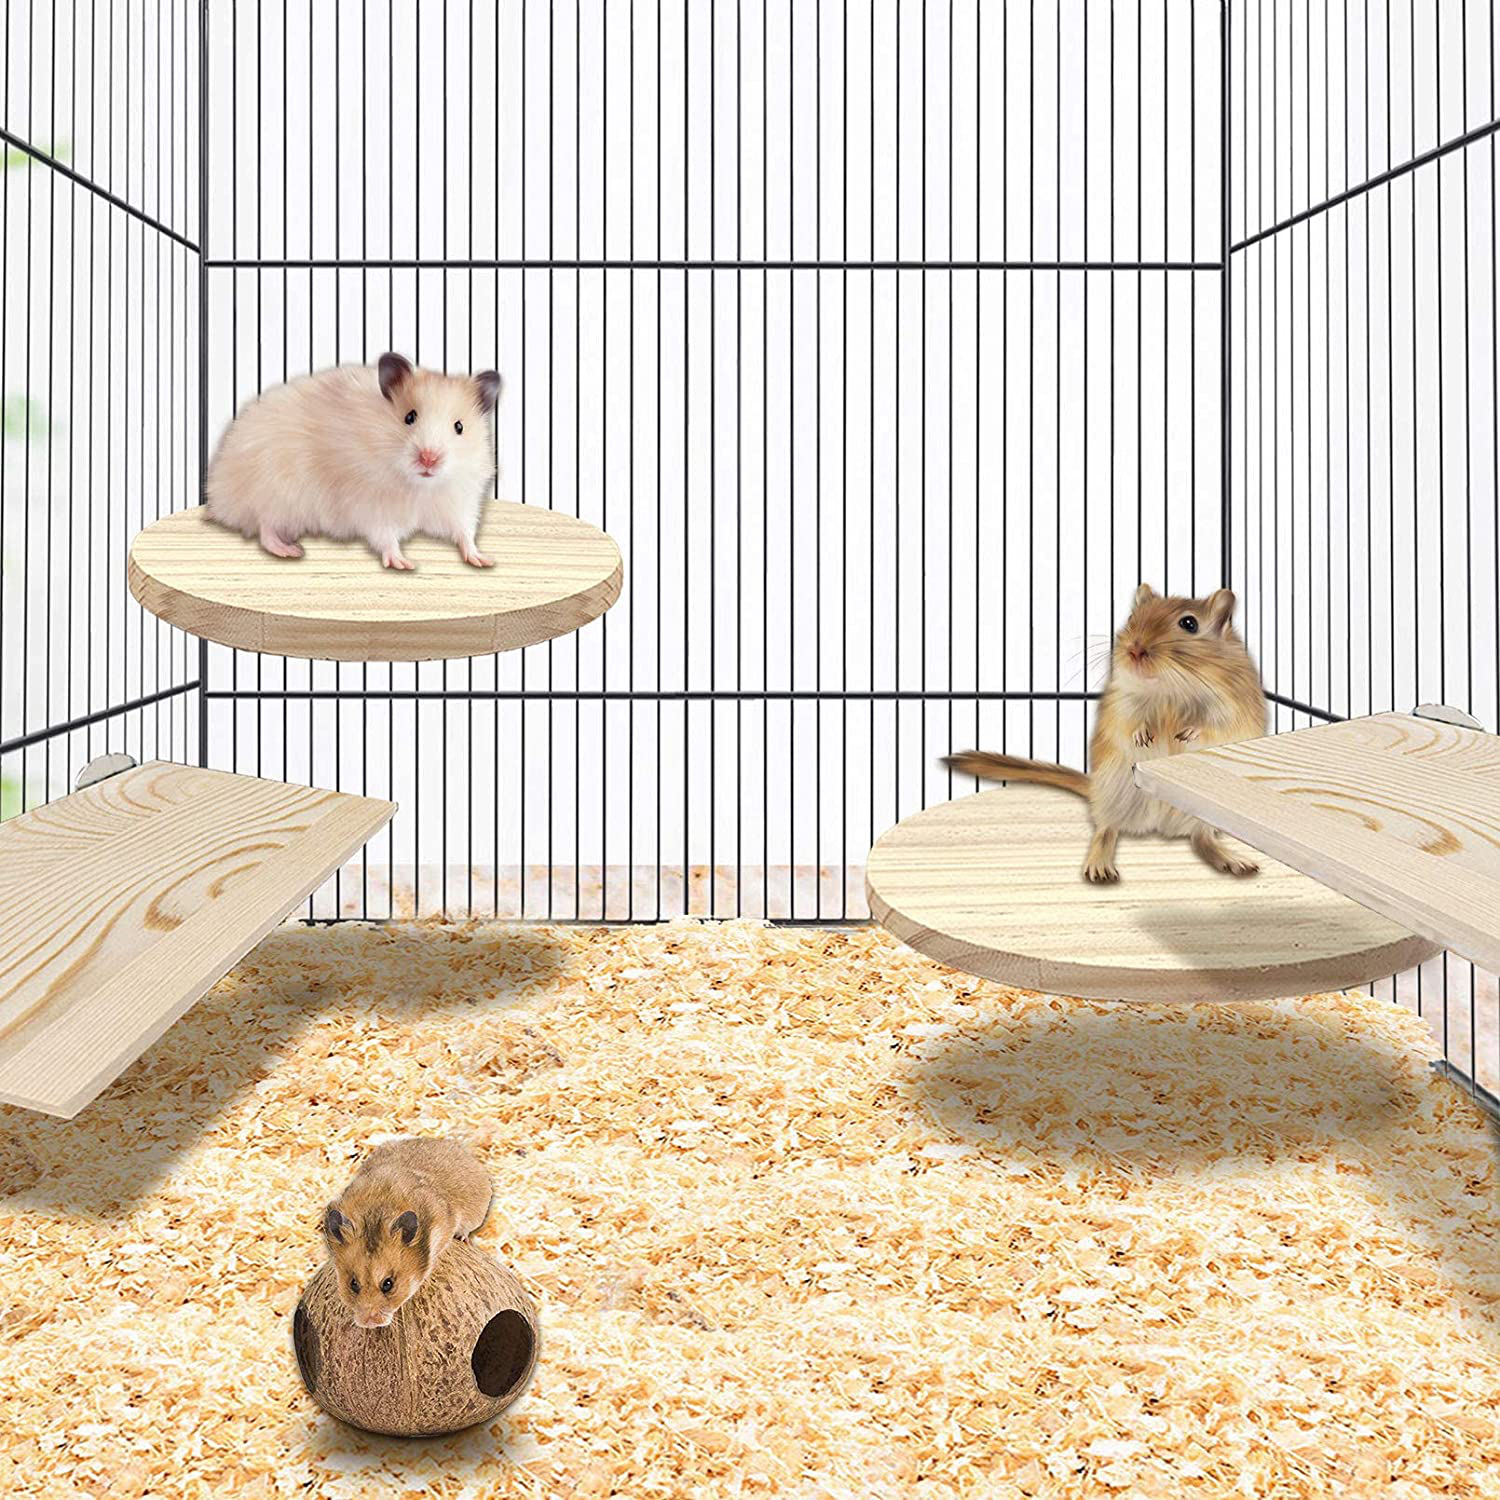 Tfwadmx Natural Wooden Hamster Stand Platform Guinea Pigs Climbing Exercise Toy Lookout Platform Gerbil Activity Playground for Squirrel Chinchilla Dwarf Parrot and Small Animals Cage Accessories